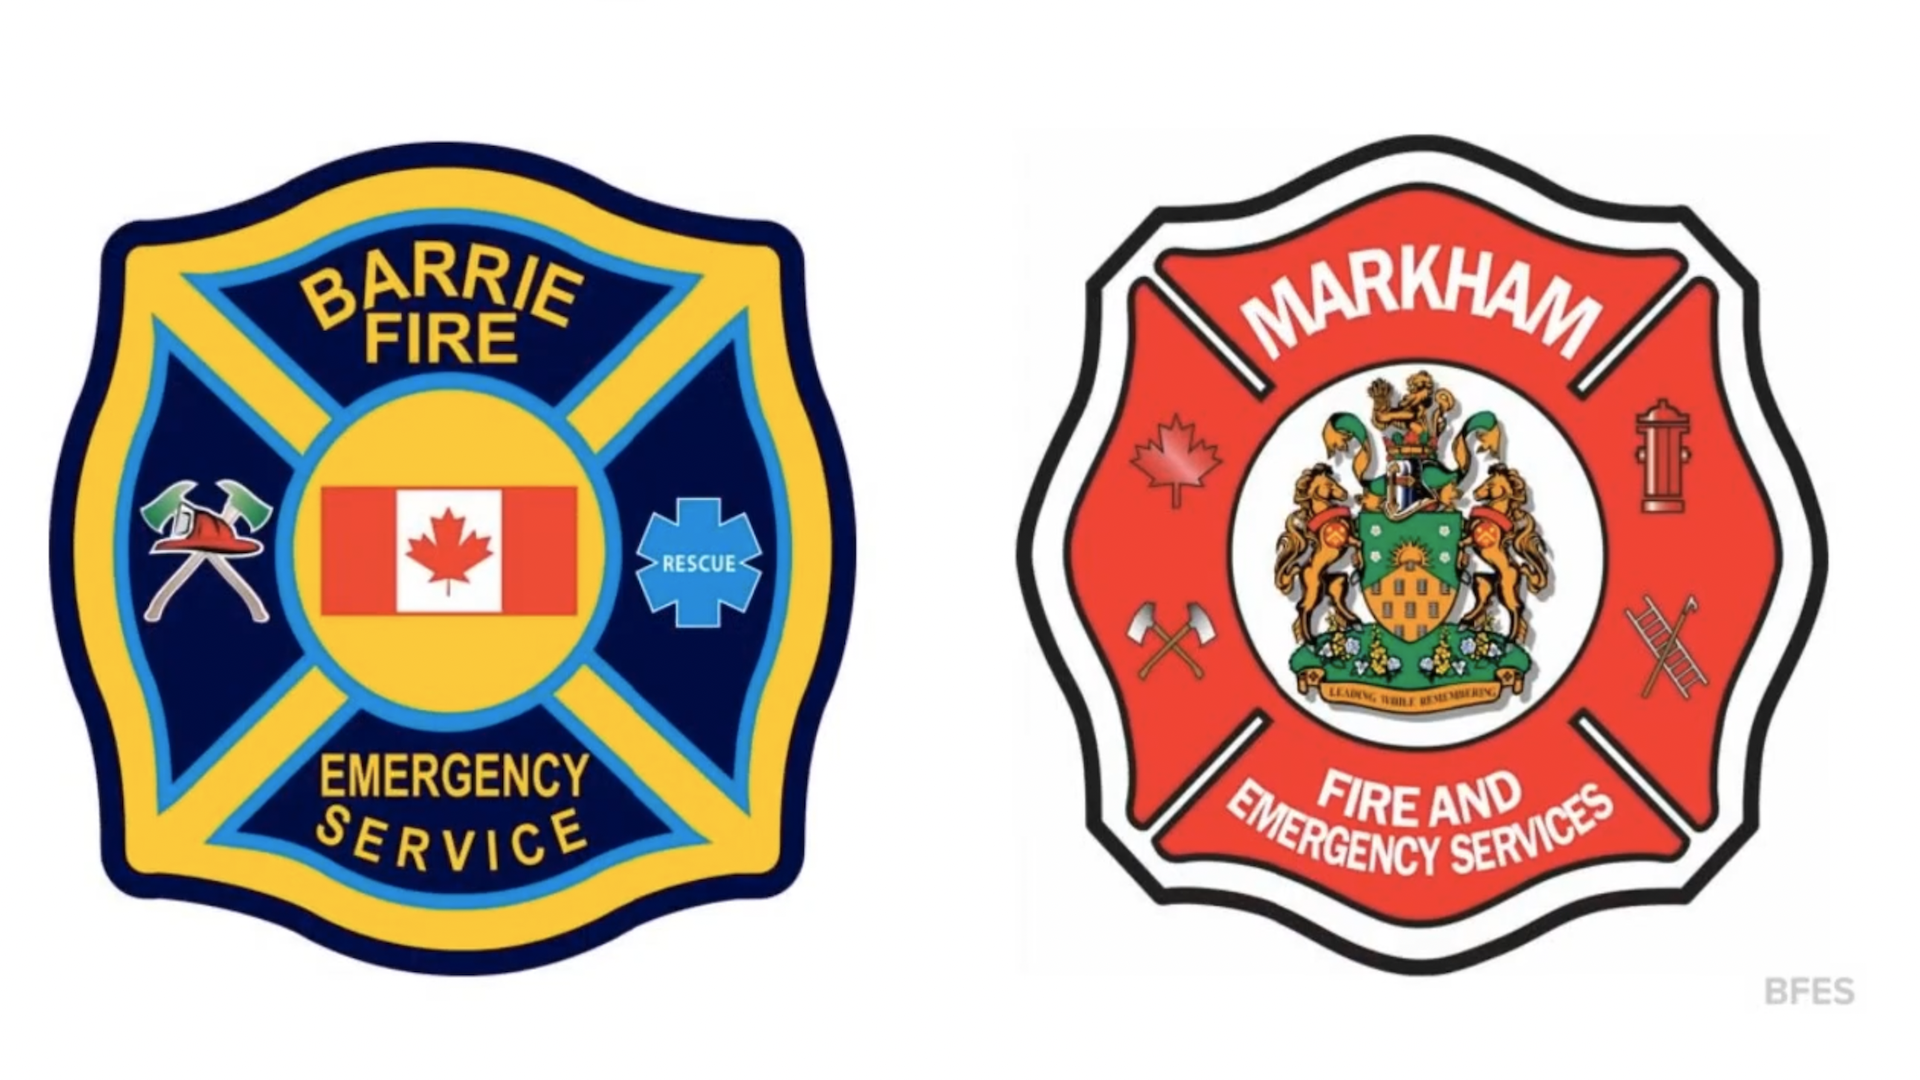 Markham Mayor praises Barrie’s fire department at the launch of new dispatch partnership